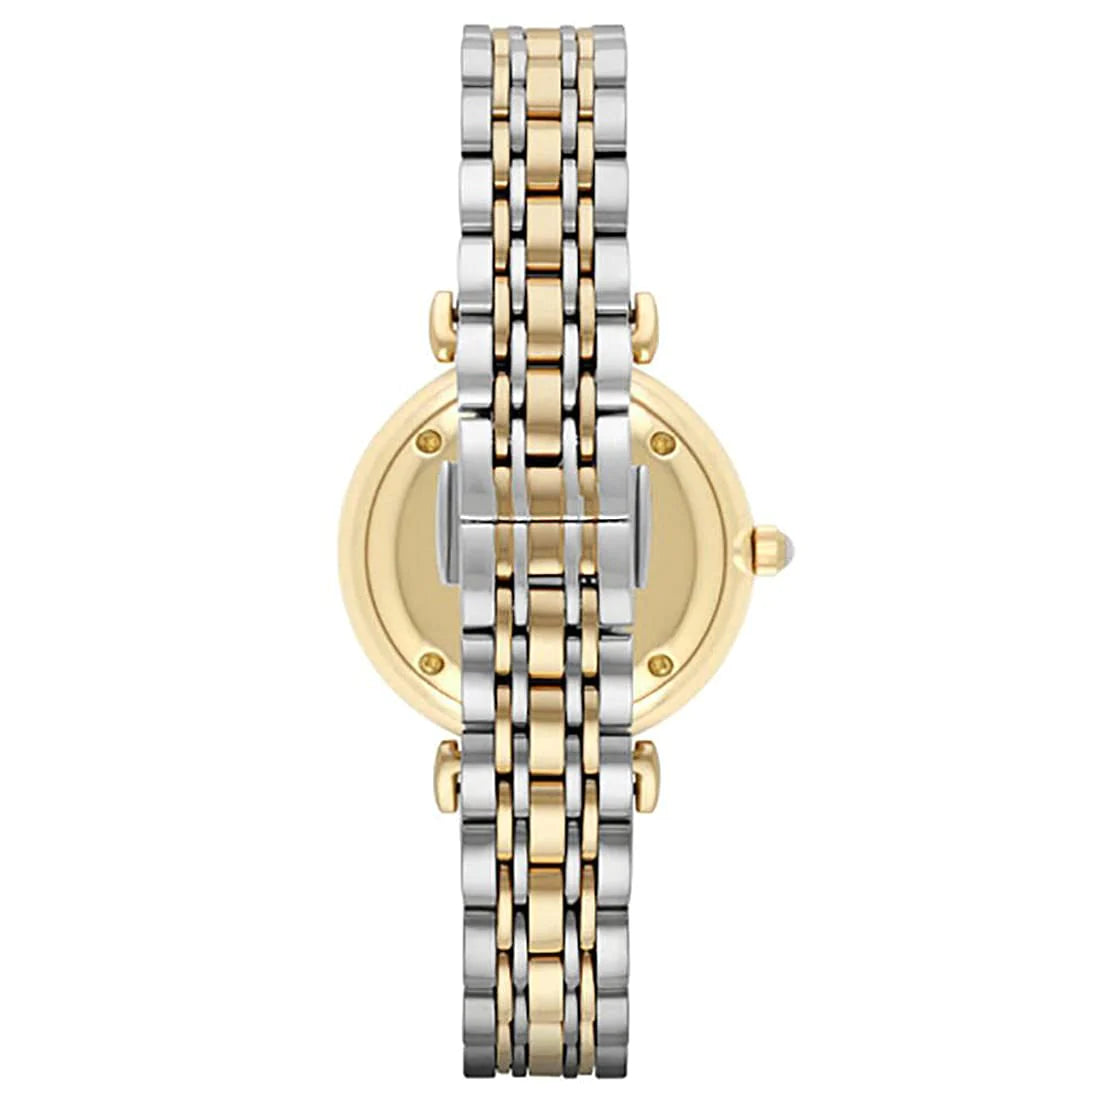 Emporio Armani Ladies Watch T-Bar Gianni Gold And Silver AR8031